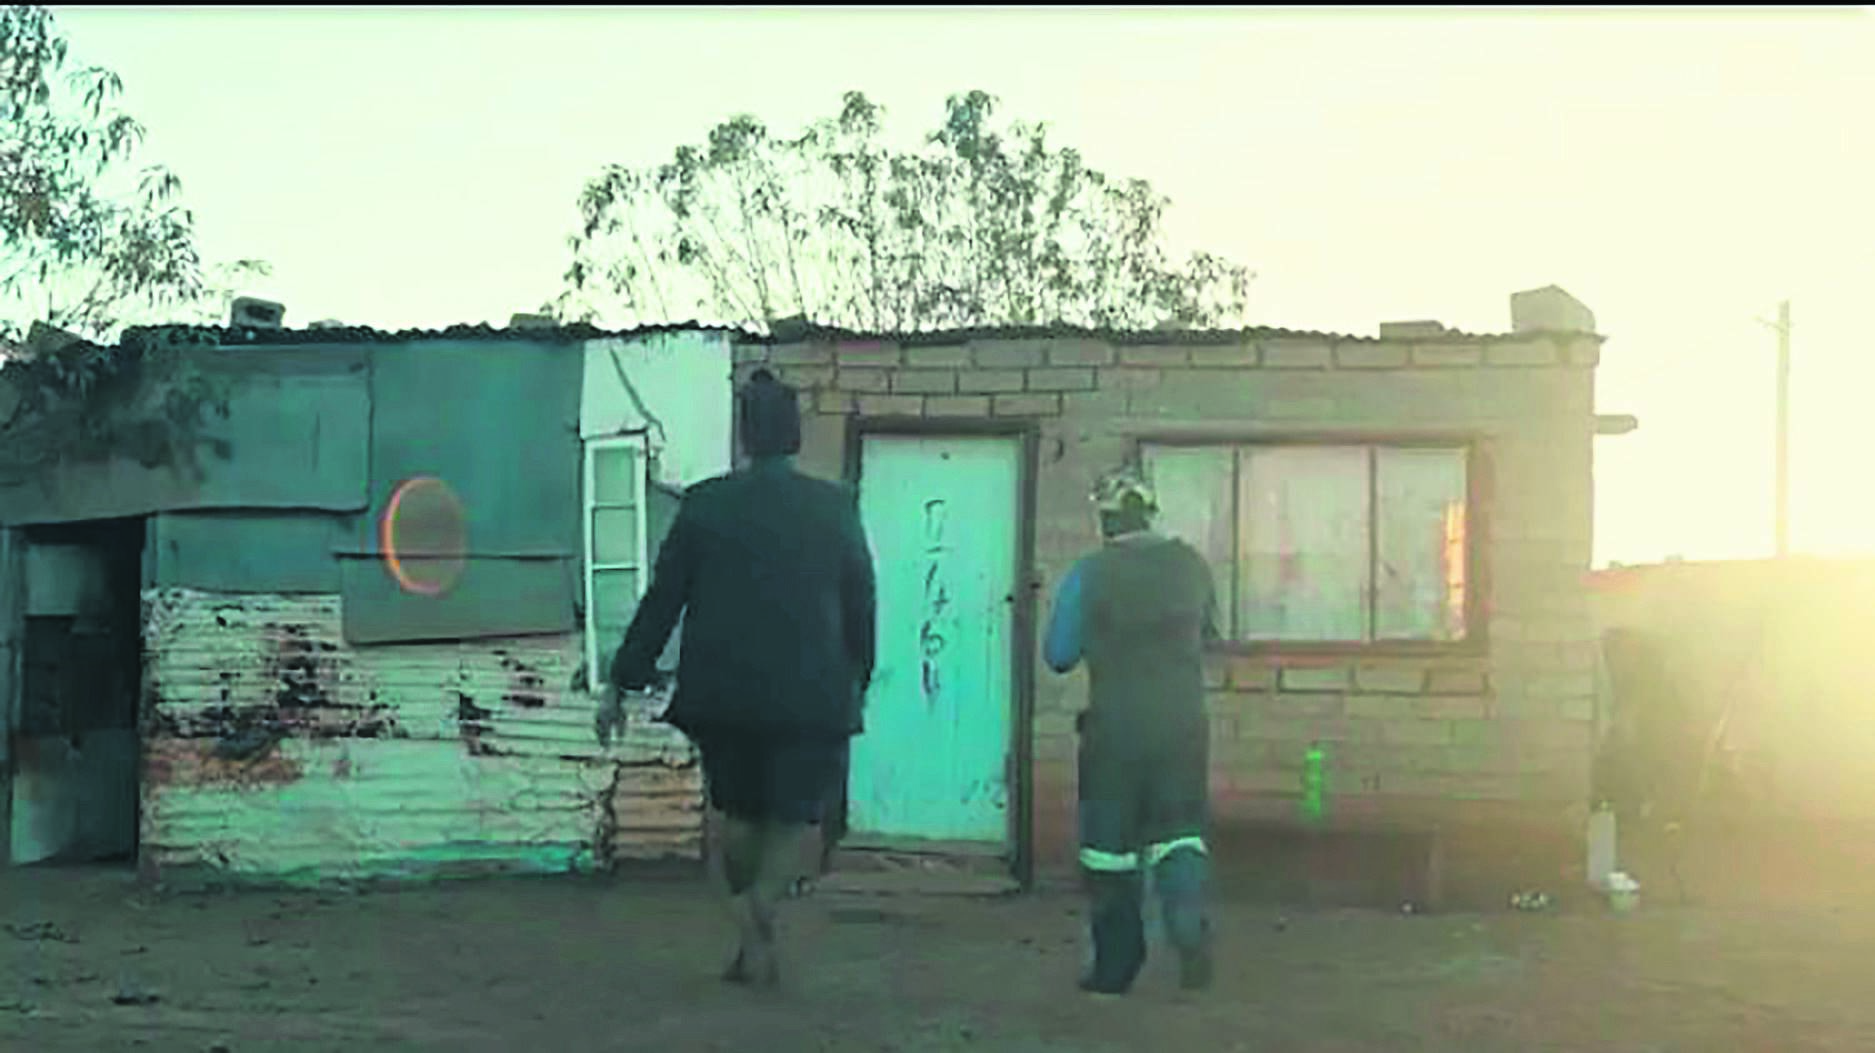 Mthandazo Gatya (left) used to stay in this shack before he got his big break. 